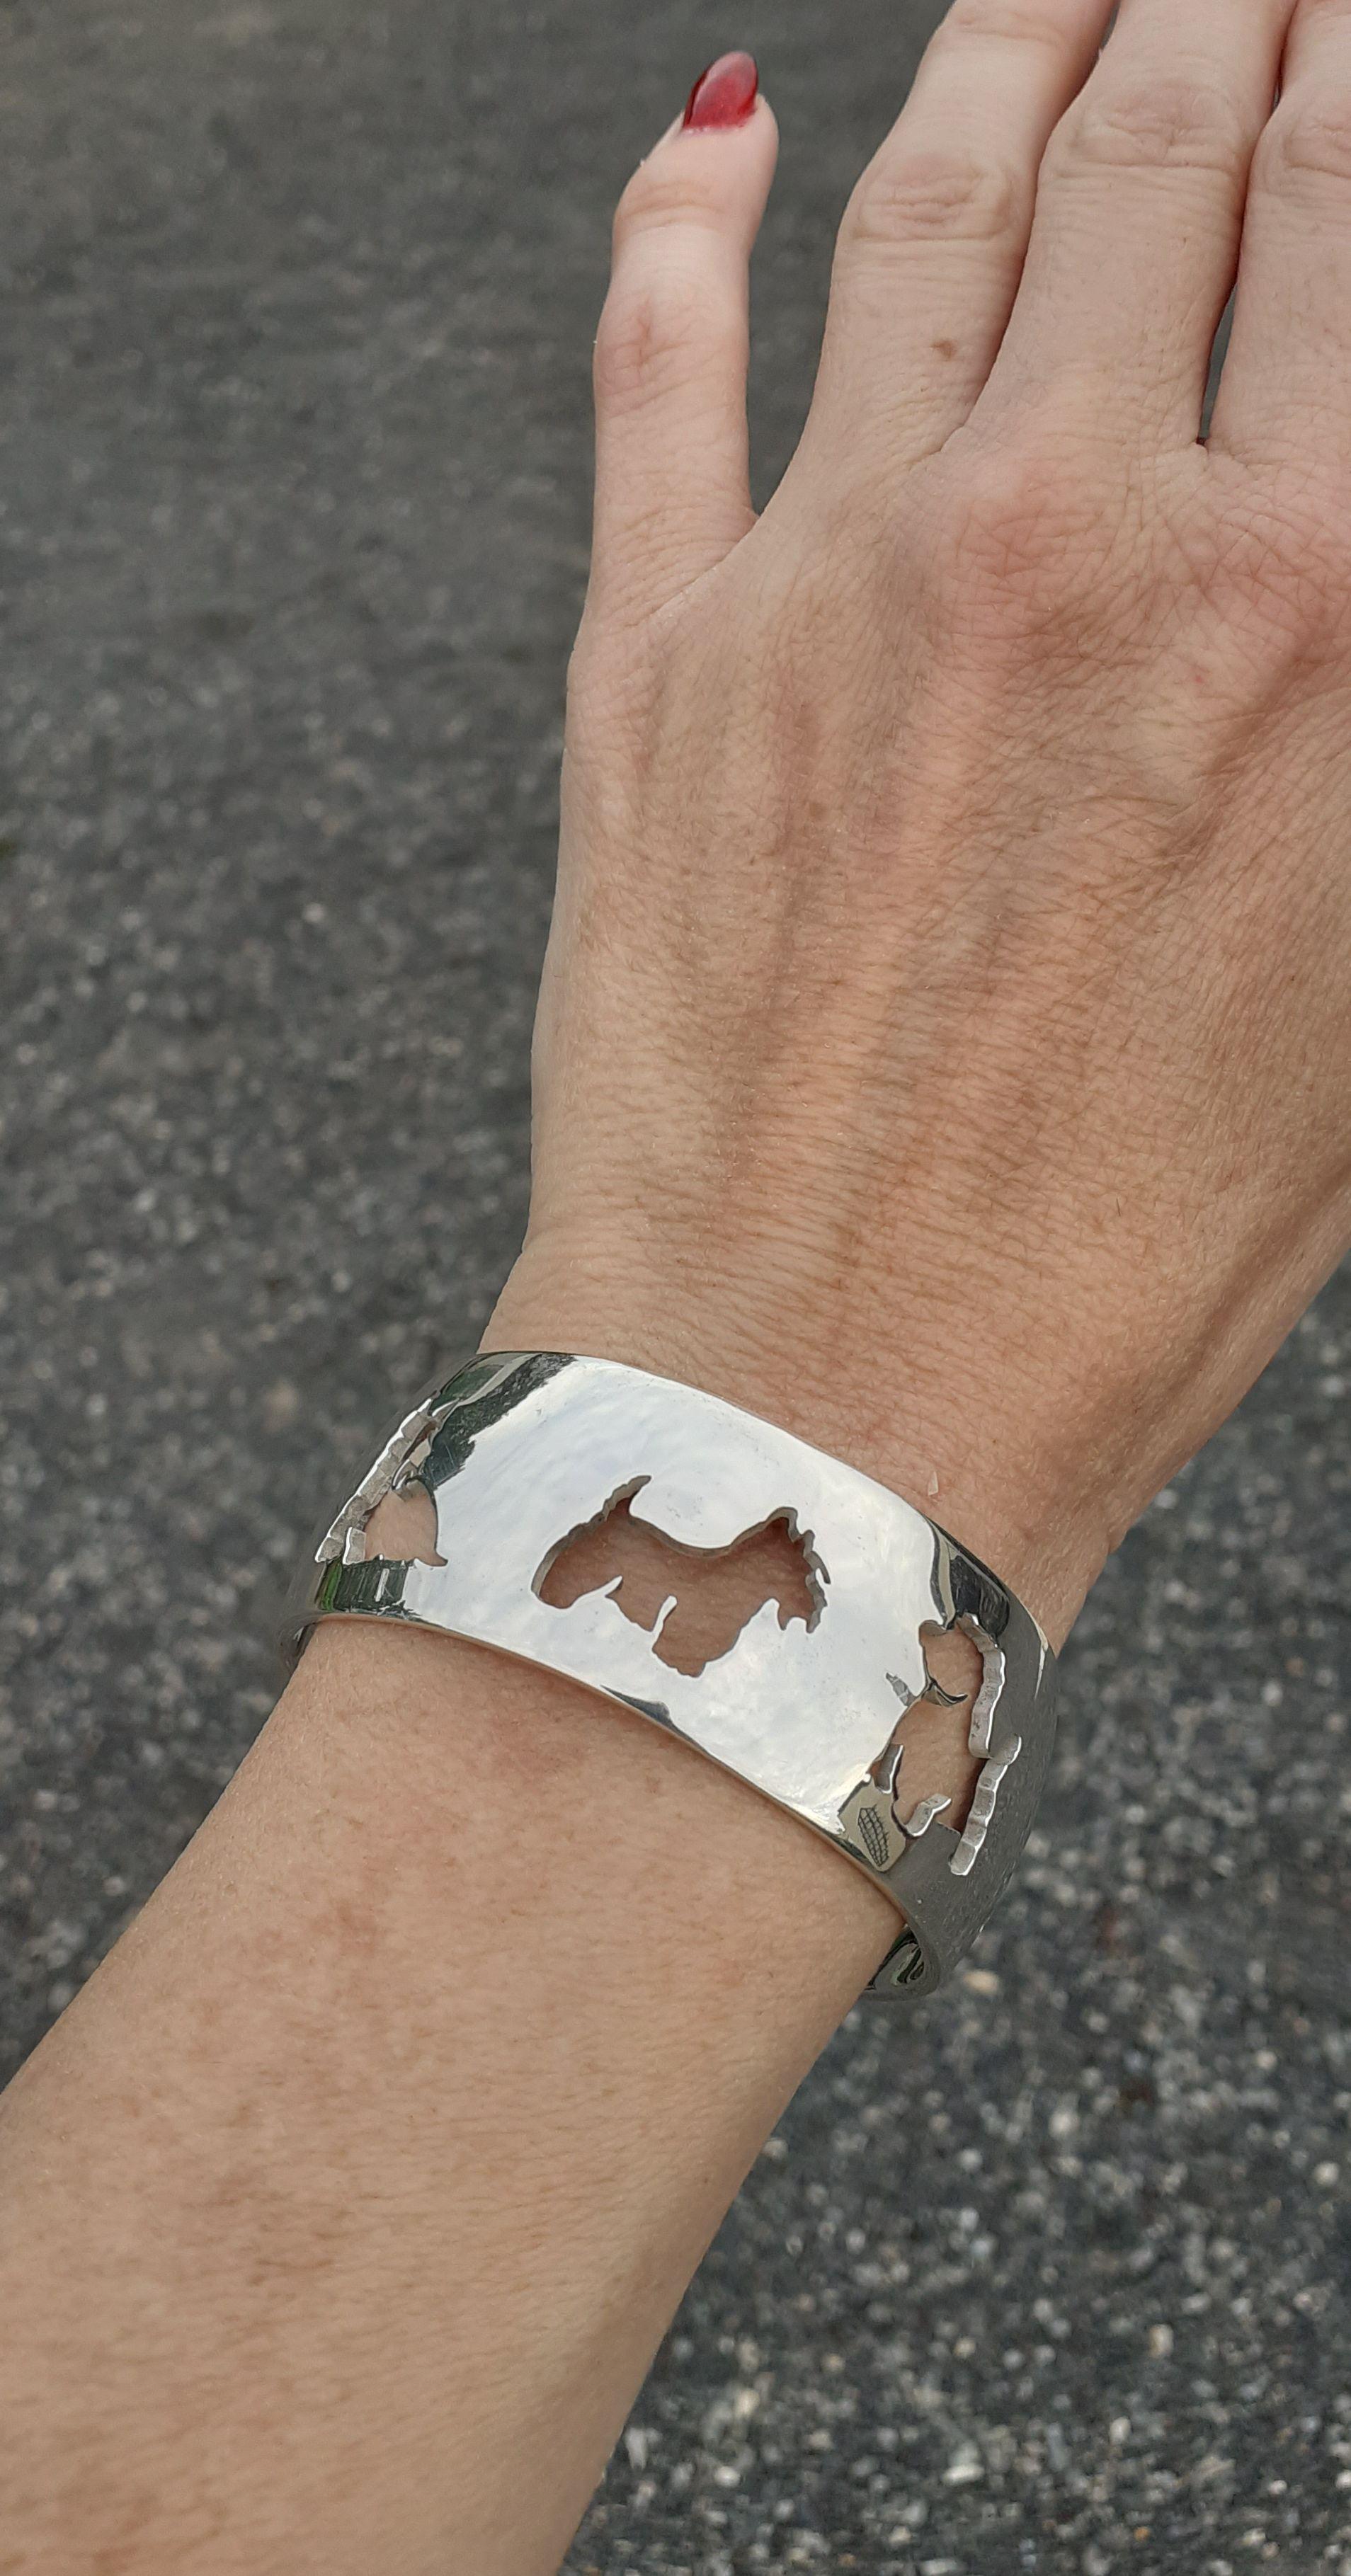 Rare and super cute Authentic Hermès Bracelet

Openwork bracelet with 5 different west highland white terrier shapes

Made of silver 

Colorway: silvery

